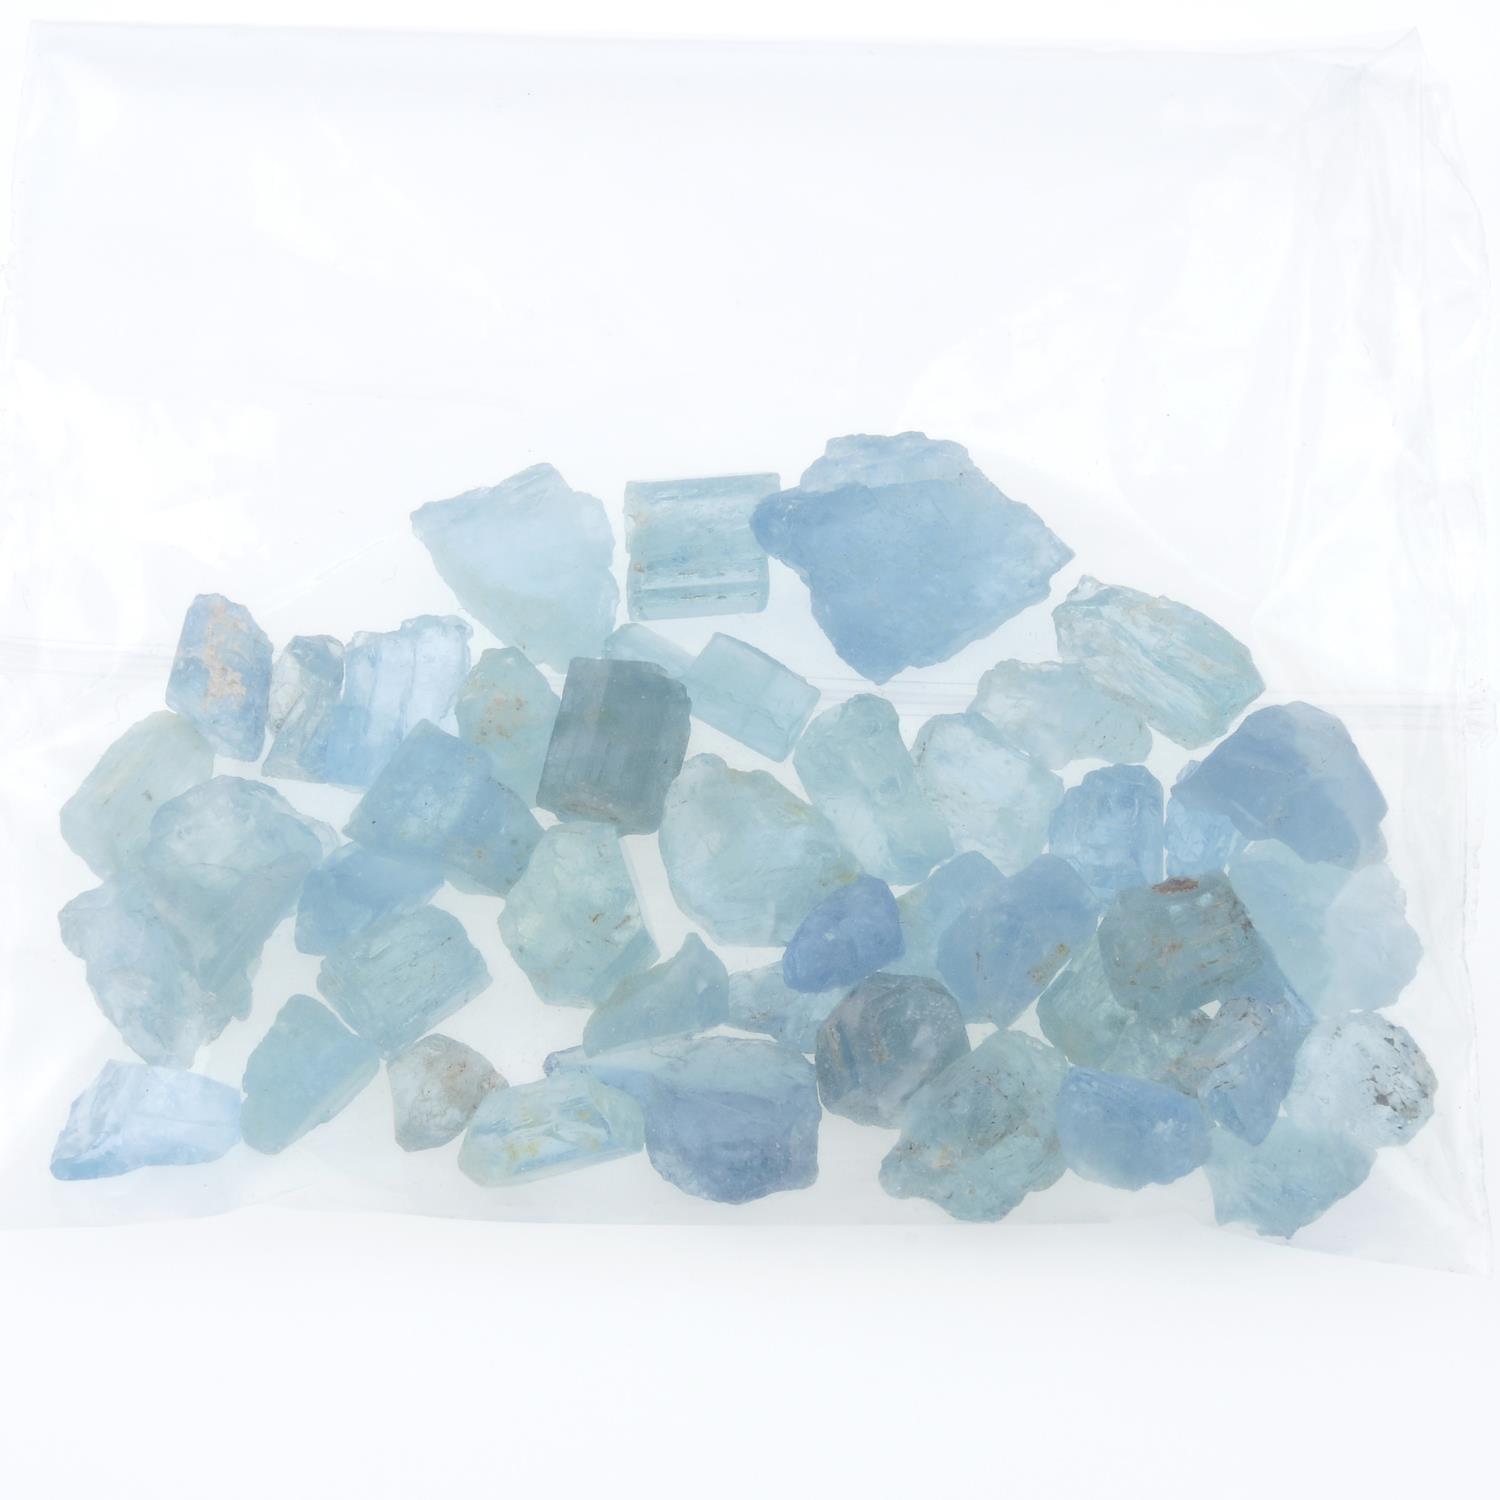 A selection of rough aquamarines. - Image 2 of 2